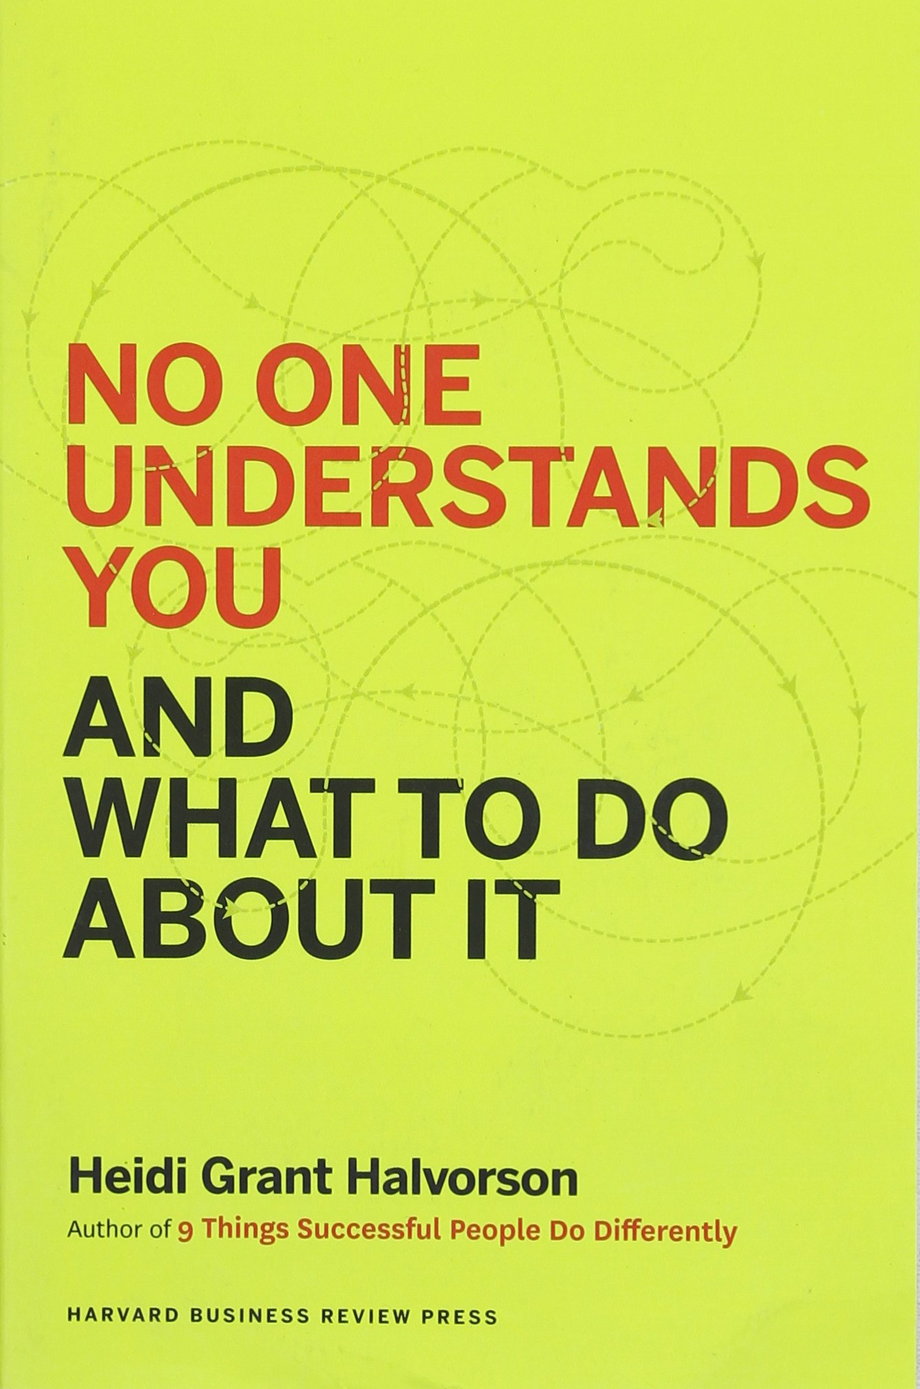 'No One Understands You And What To Do About It' by Heidi Grant Halvorson